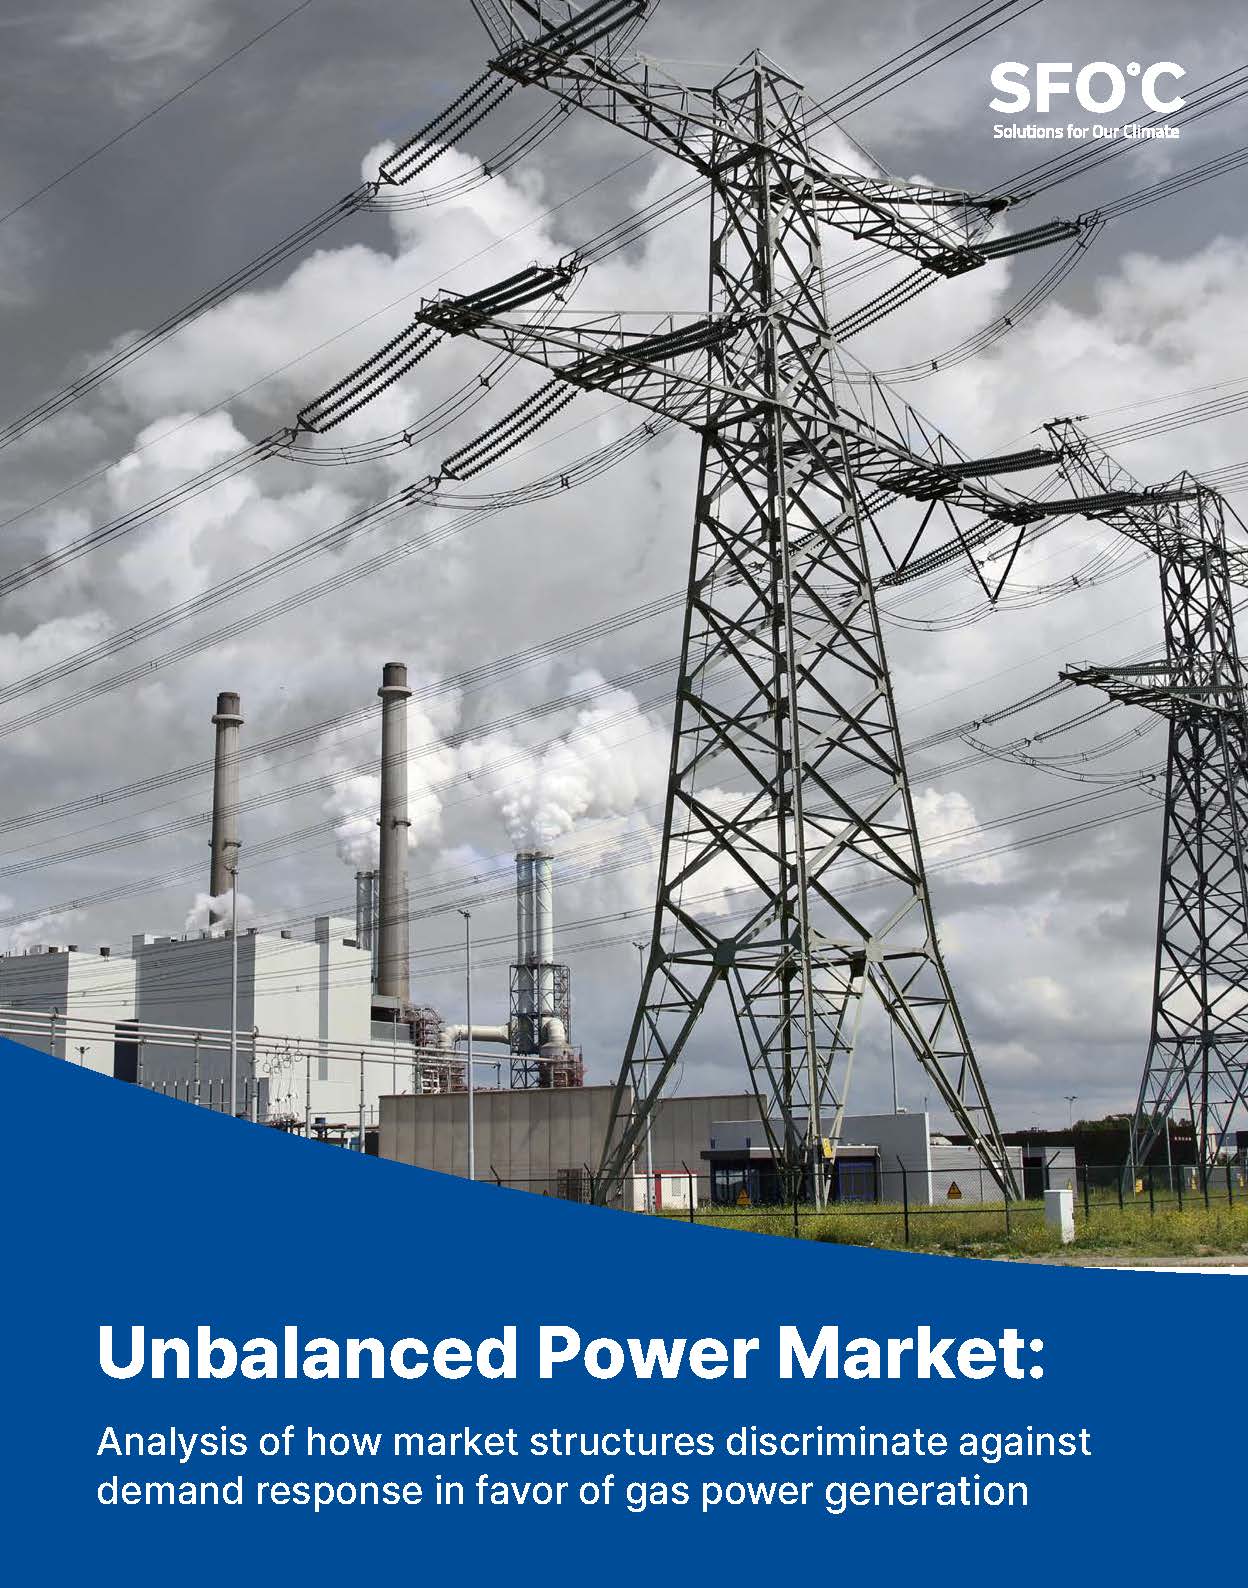 Unbalanced Power Market: Analysis of how market structures discriminate against demand response in favor of gas power generation